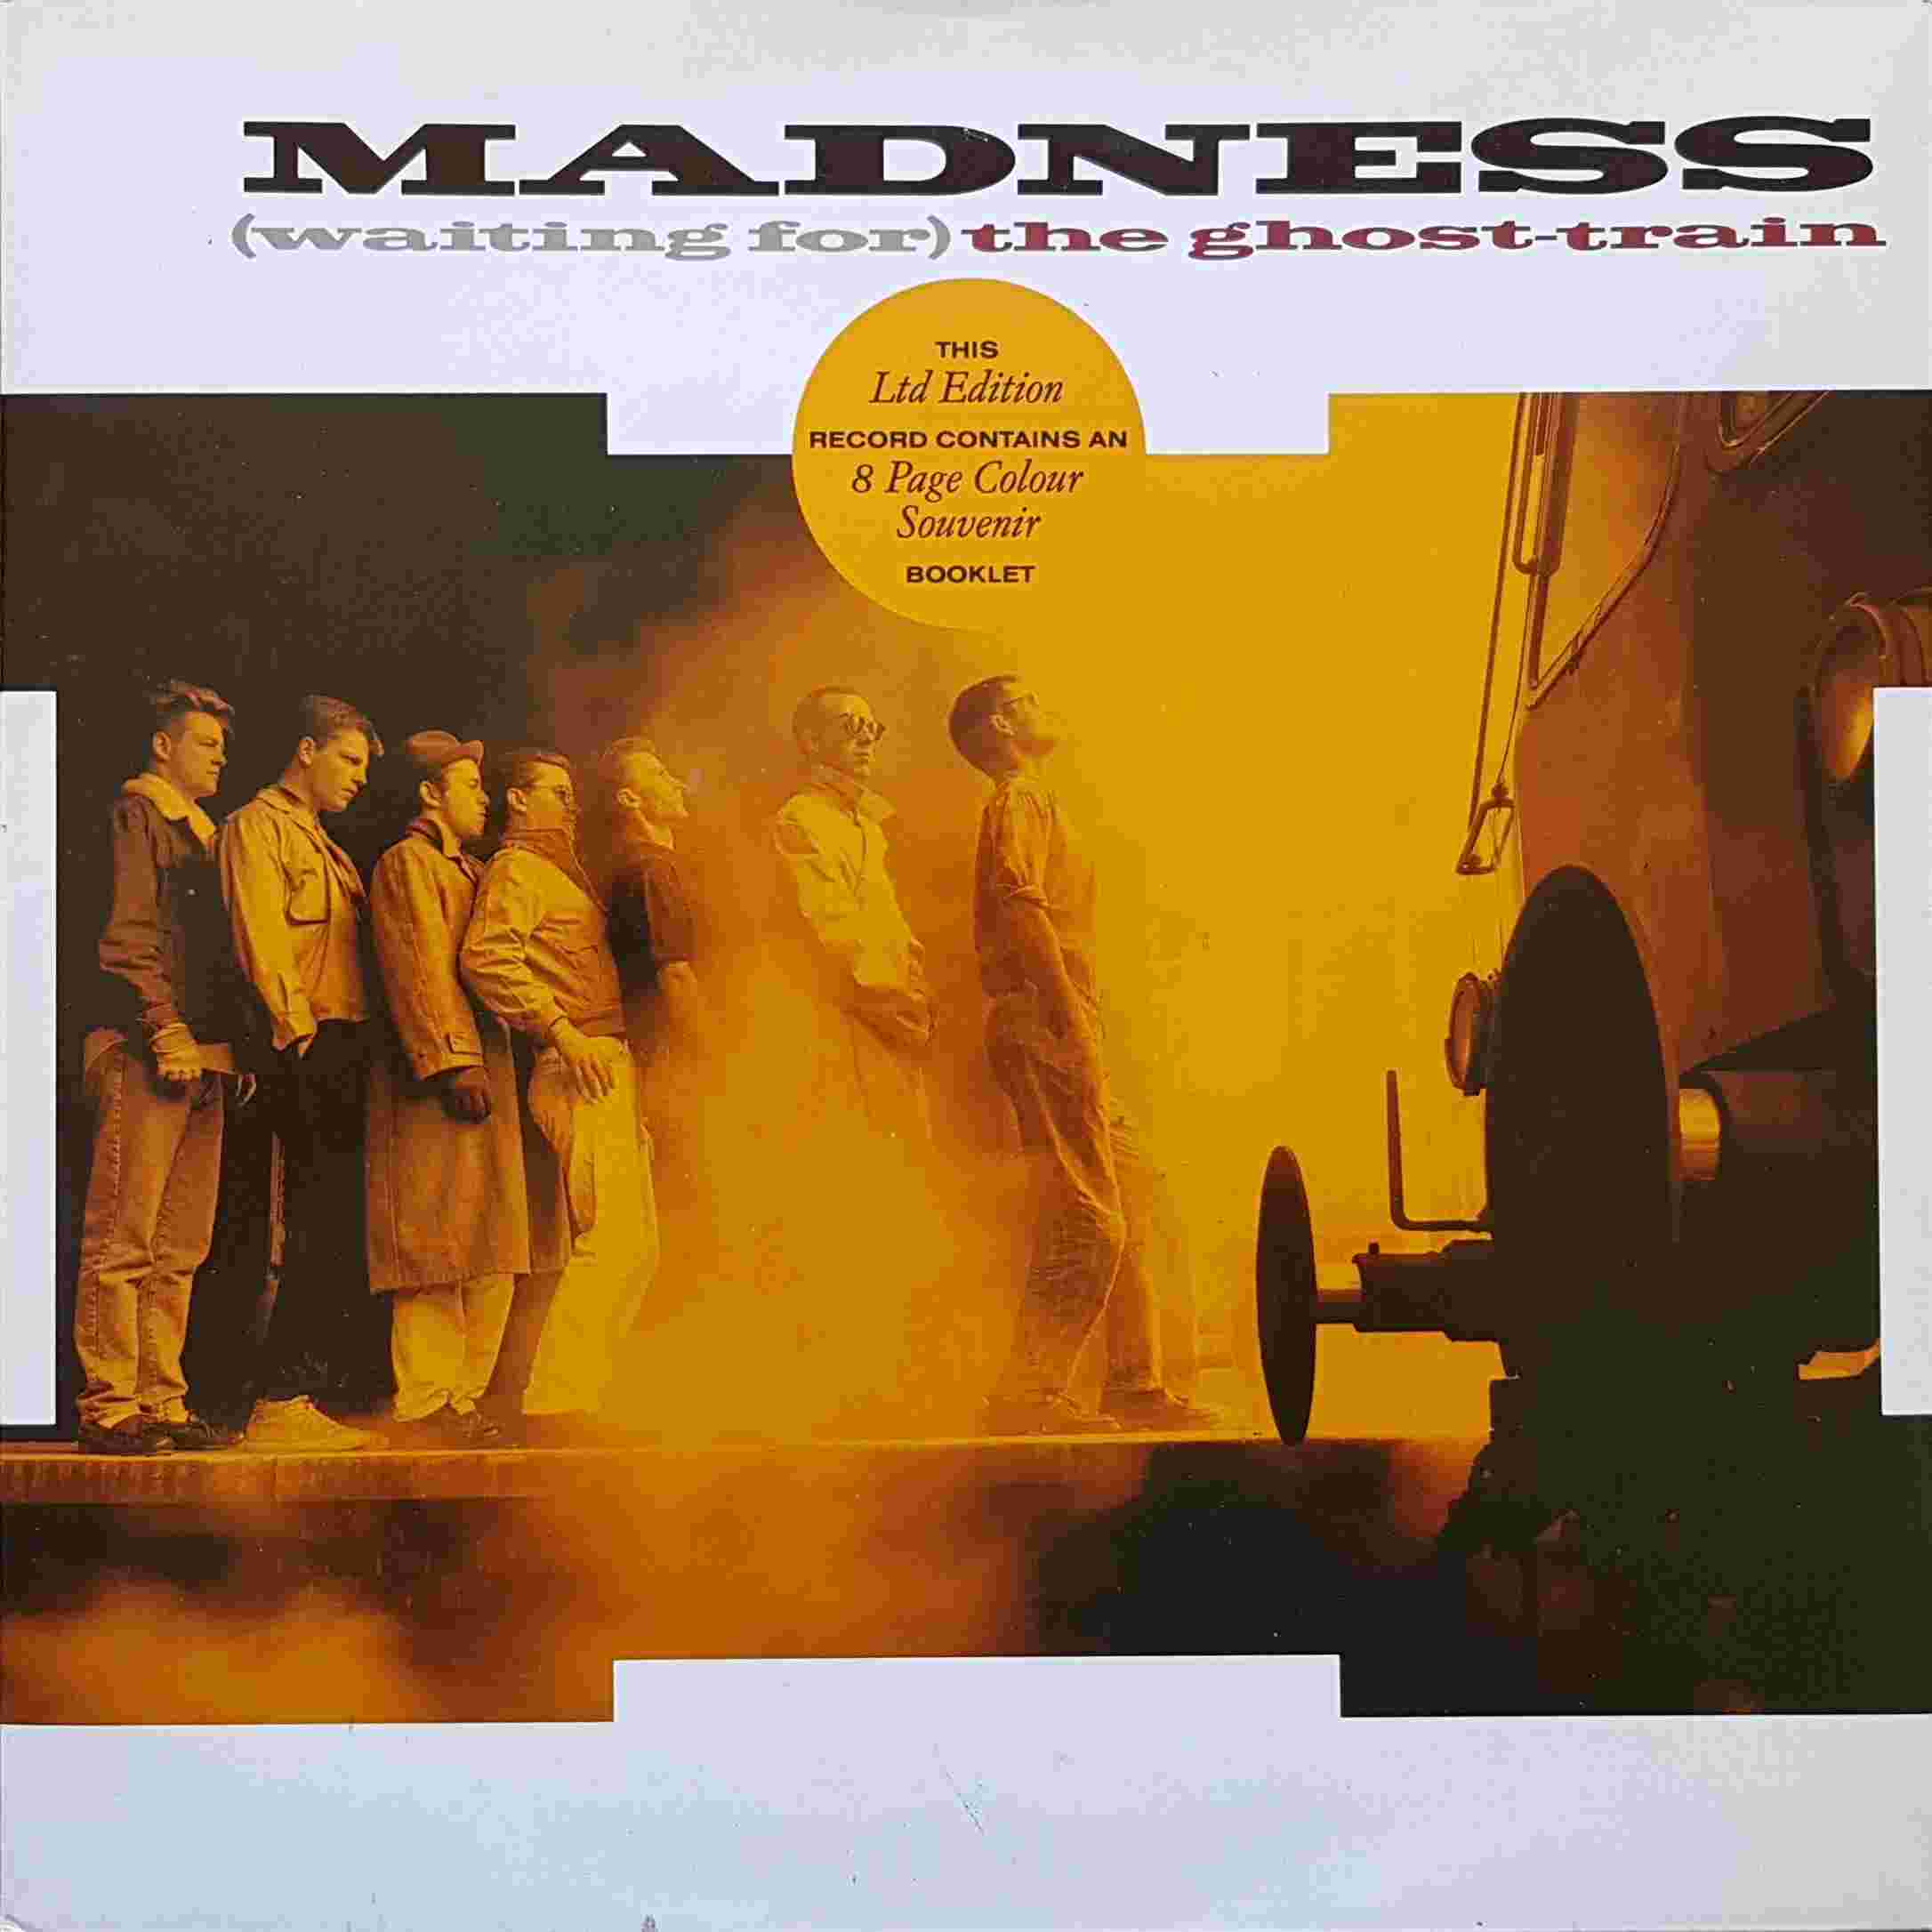 Picture of JAZZ B 9 12 (Waiting for) The ghost-train - Limited edition by artist Madness  